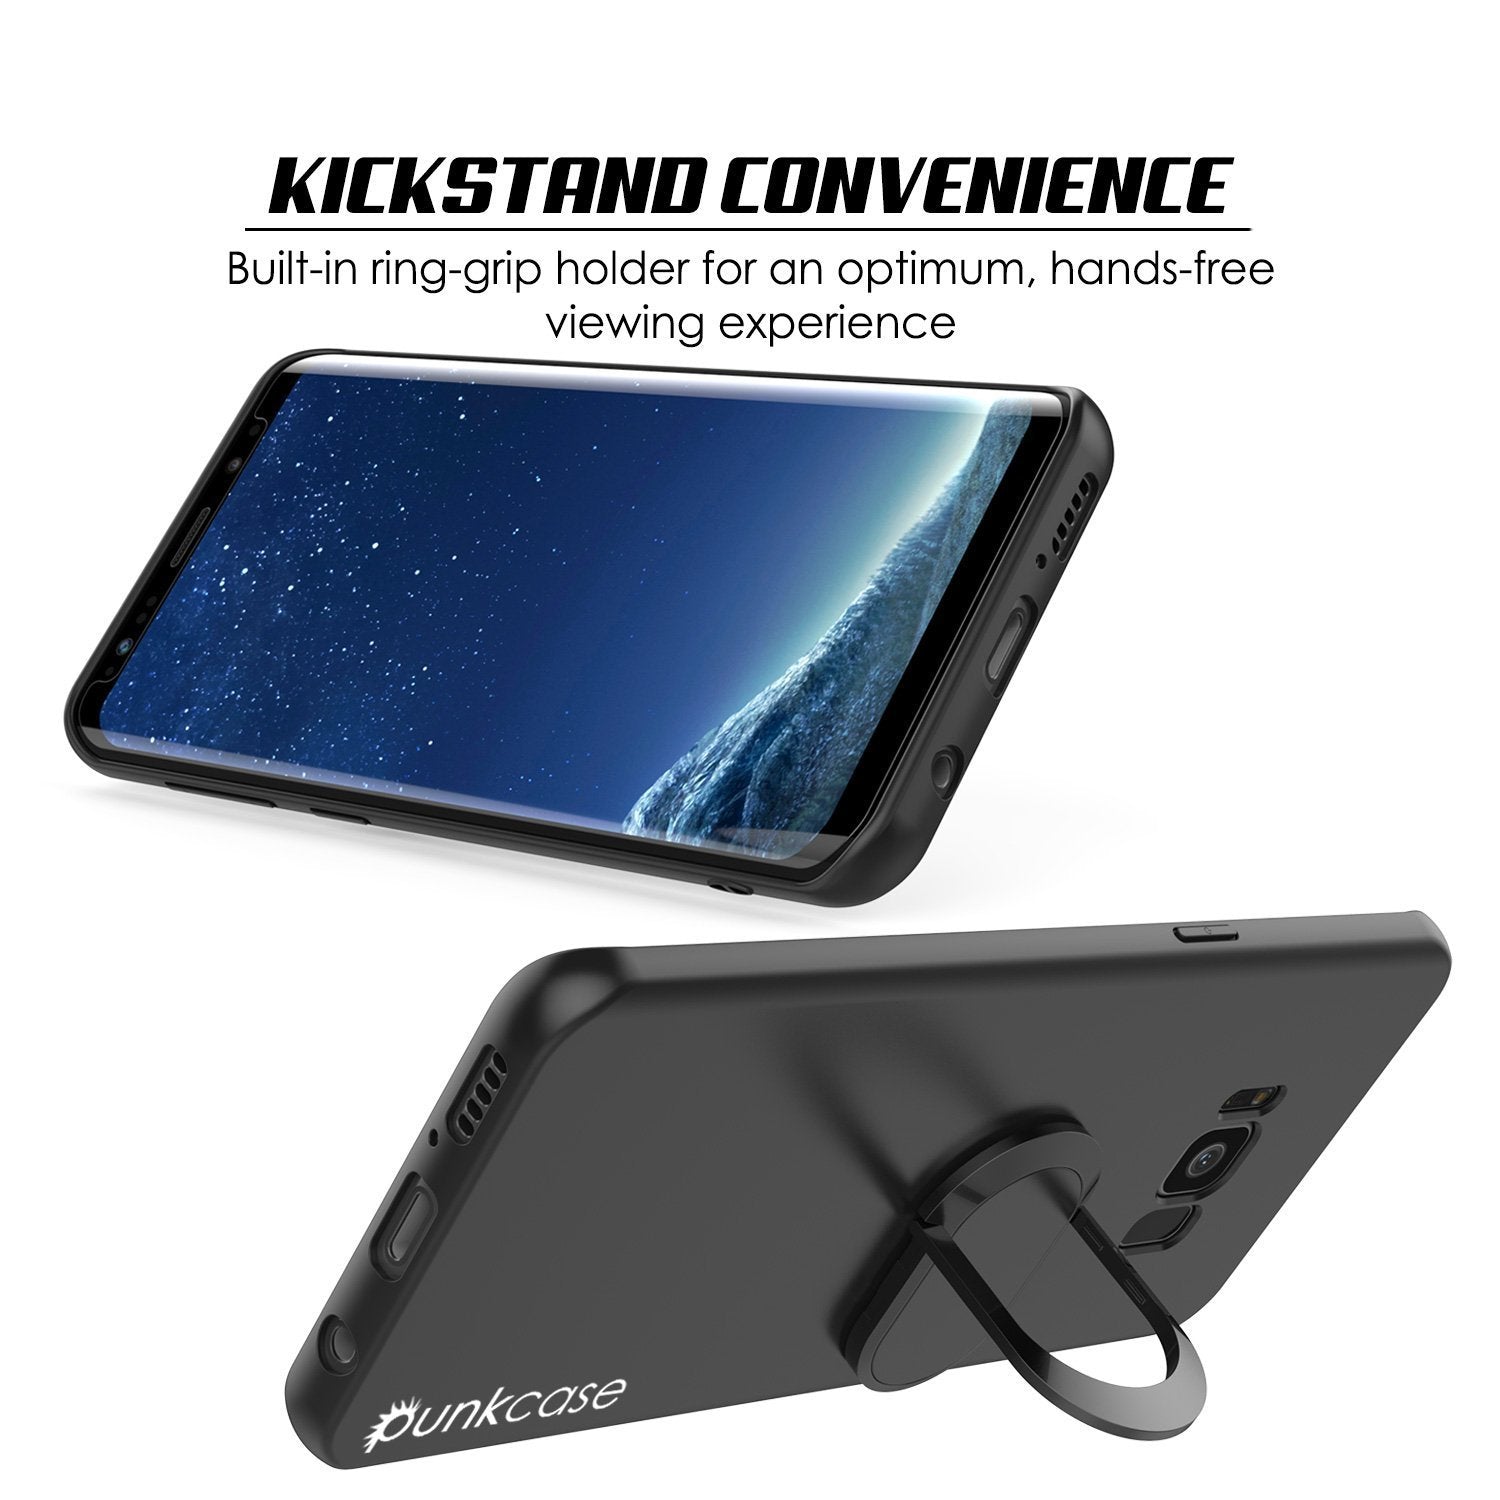 Galaxy S8 PLUS, Punkcase Magnetix Protective TPU Cover W/ Kickstand, Screen Protector [Black]